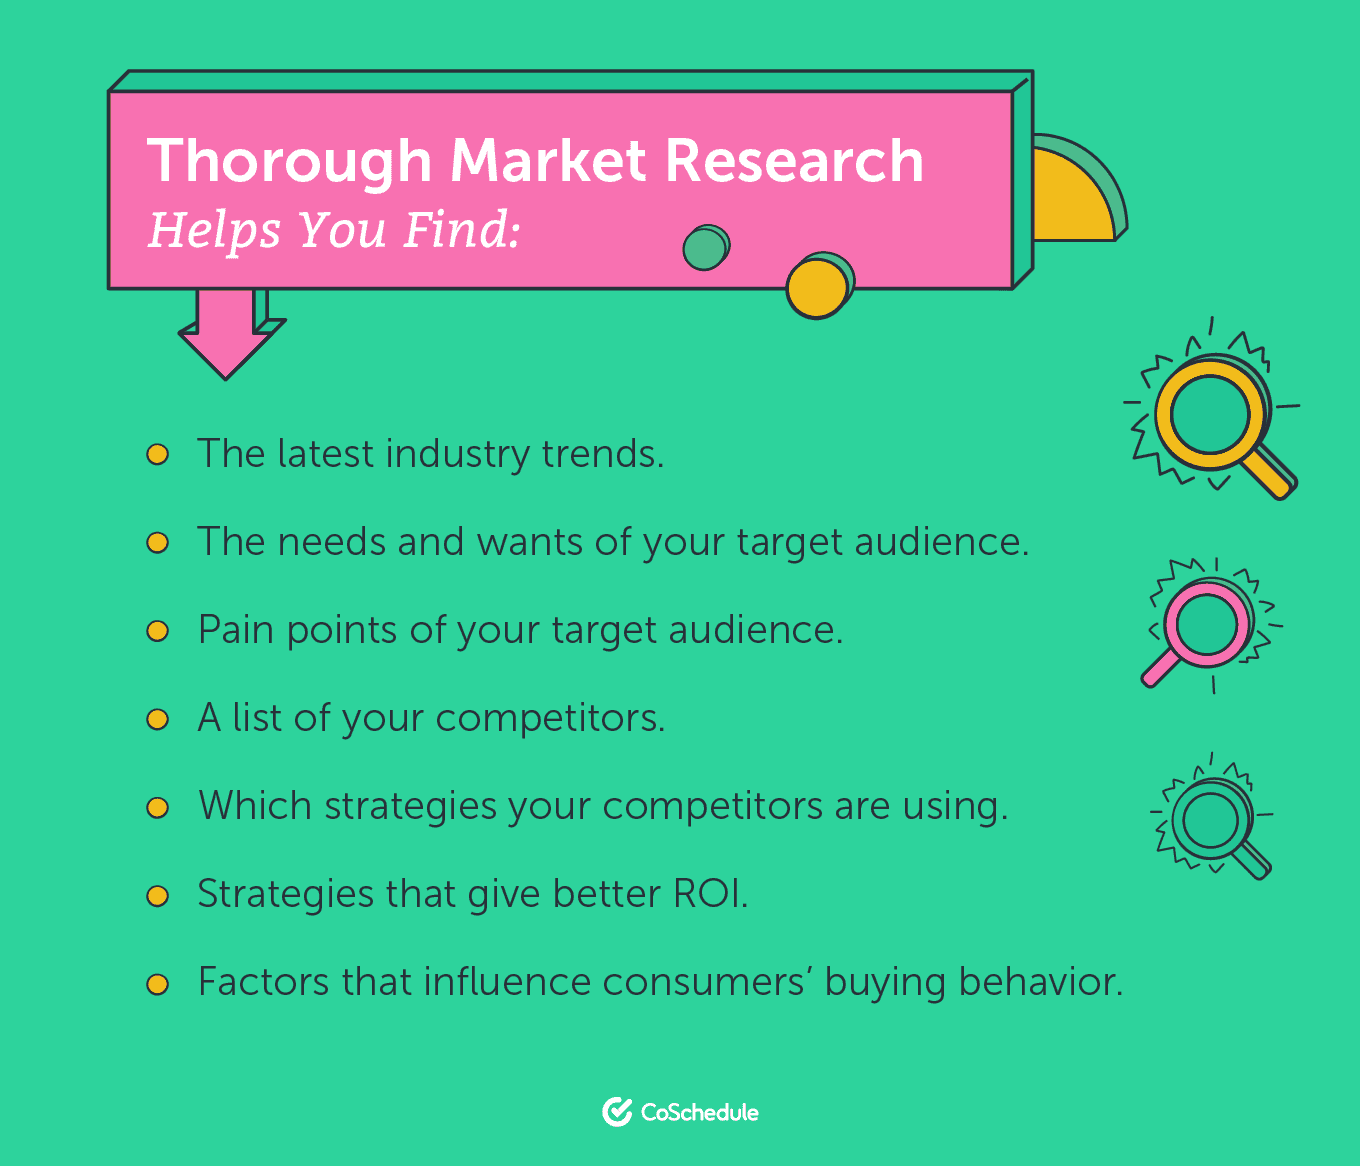 What market research helps with